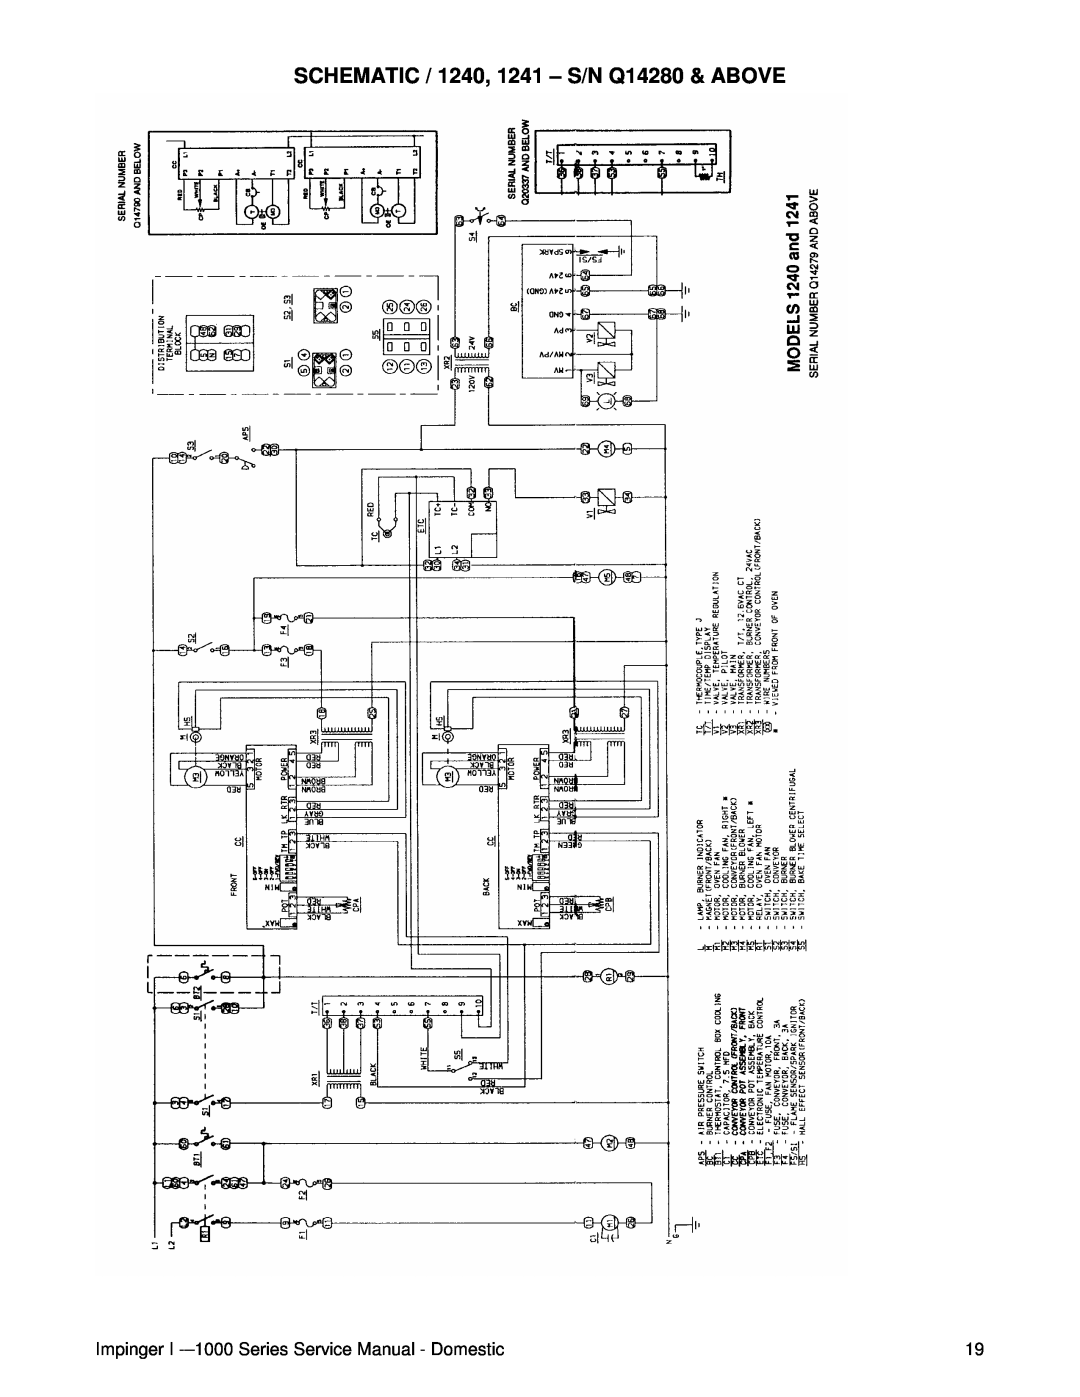 Lincoln 1200, 1400 SCHEMATIC / 1240, 1241 - S/N Q14280 & ABOVE, Impinger I -–1000Series Service Manual - Domestic 